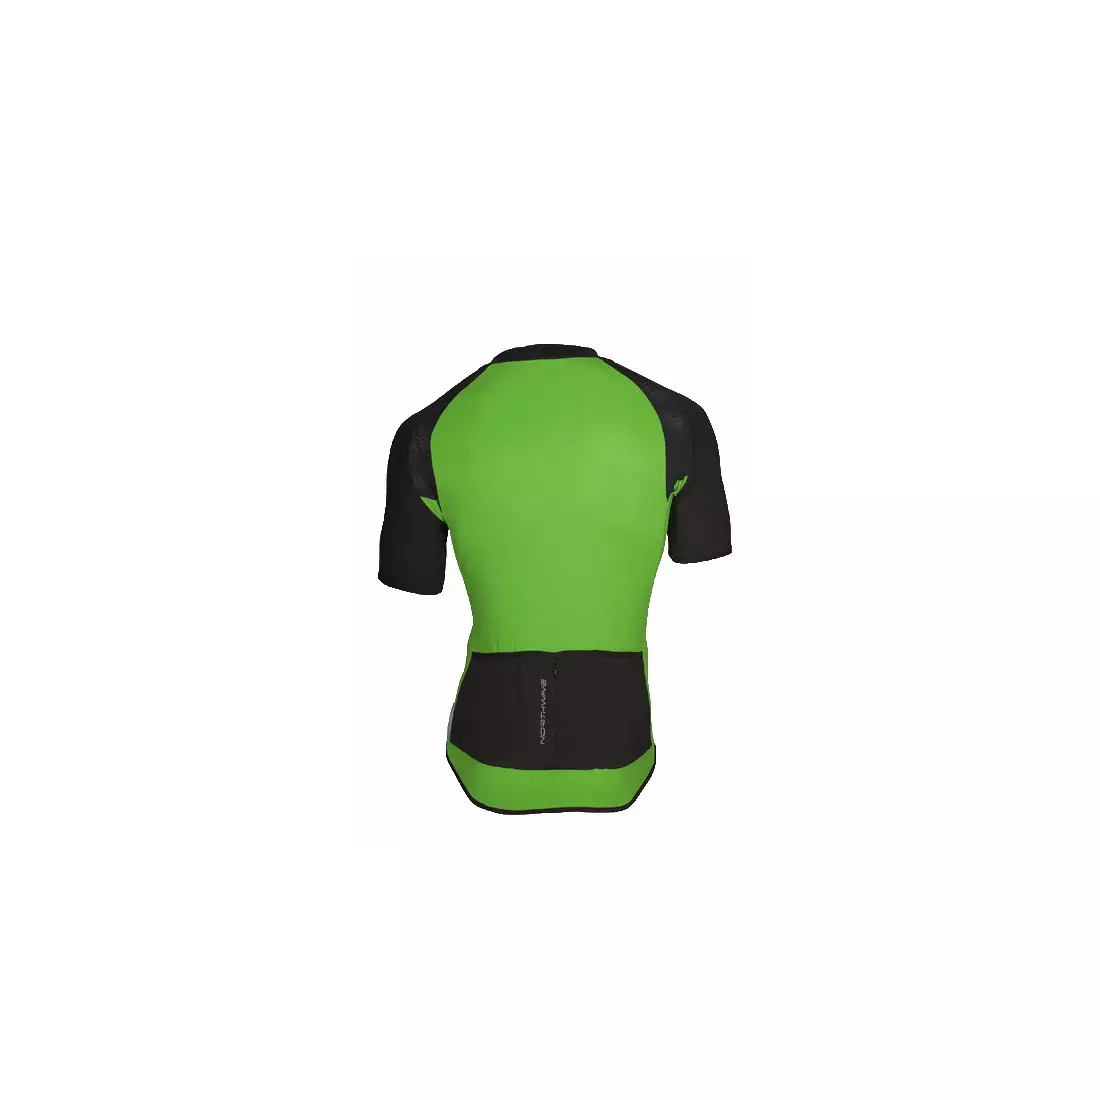 NORTHWAVE ROCKER men's cycling jersey, black and green